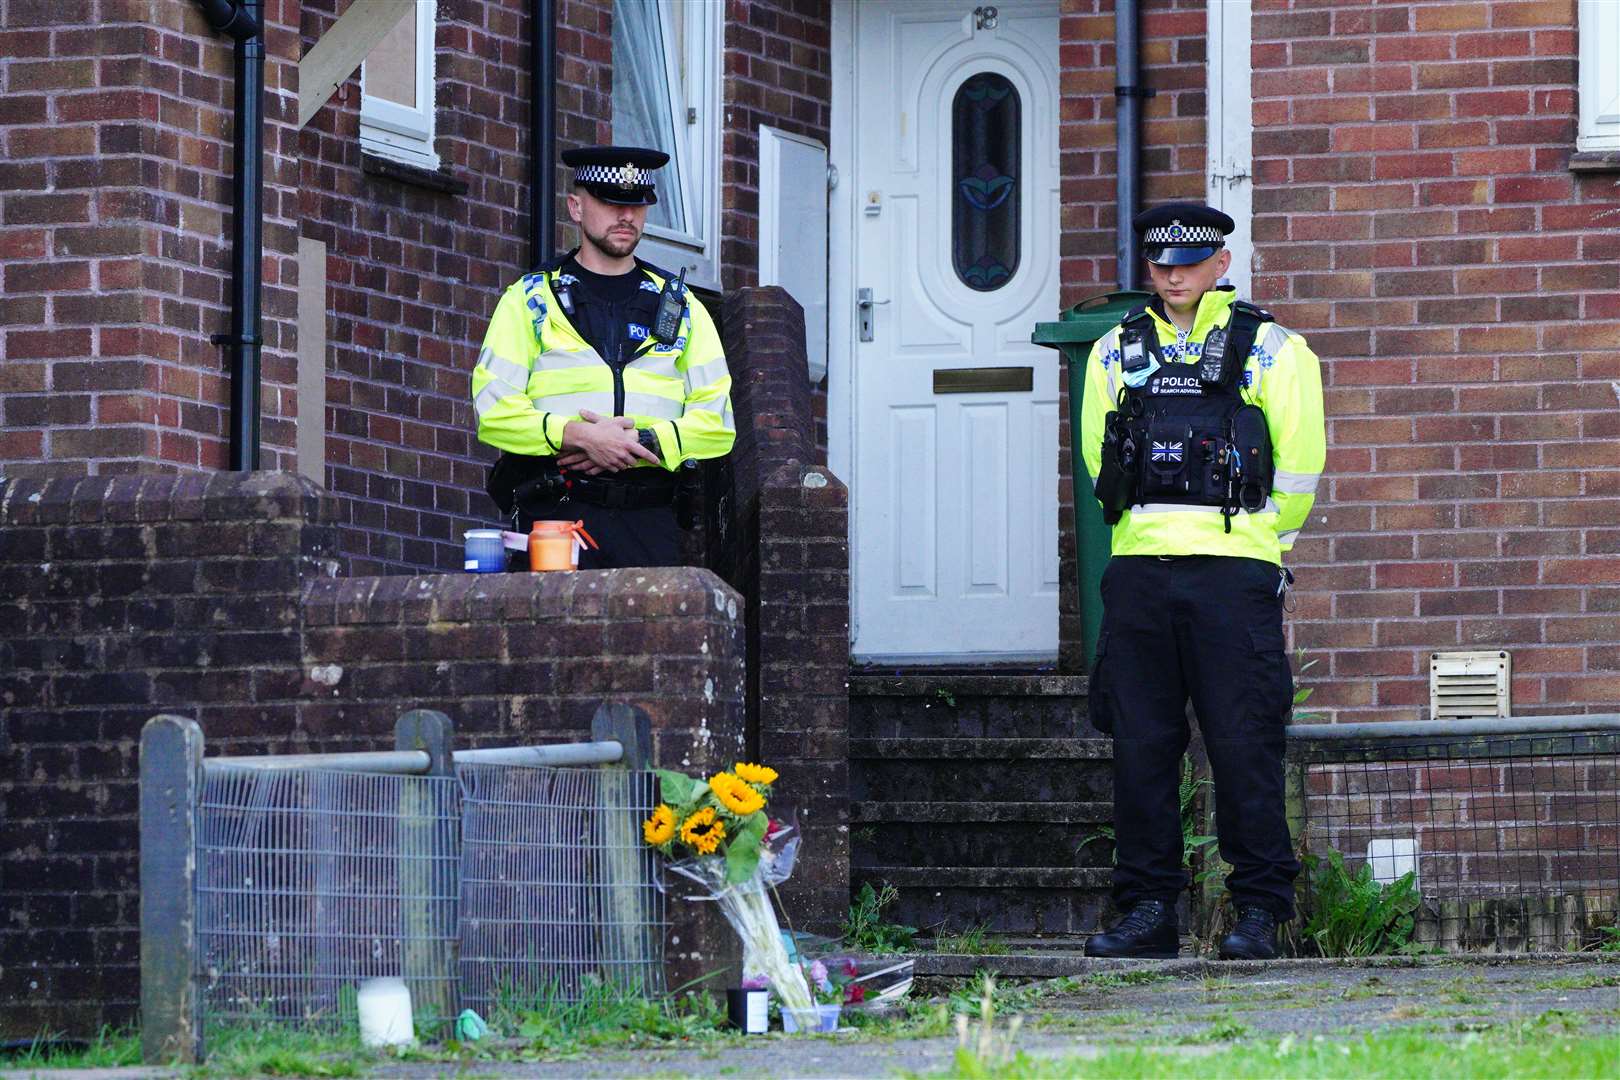 Floral tributes left outside an address in Biddick Drive as police stand guard (Ben Birchall/PA)